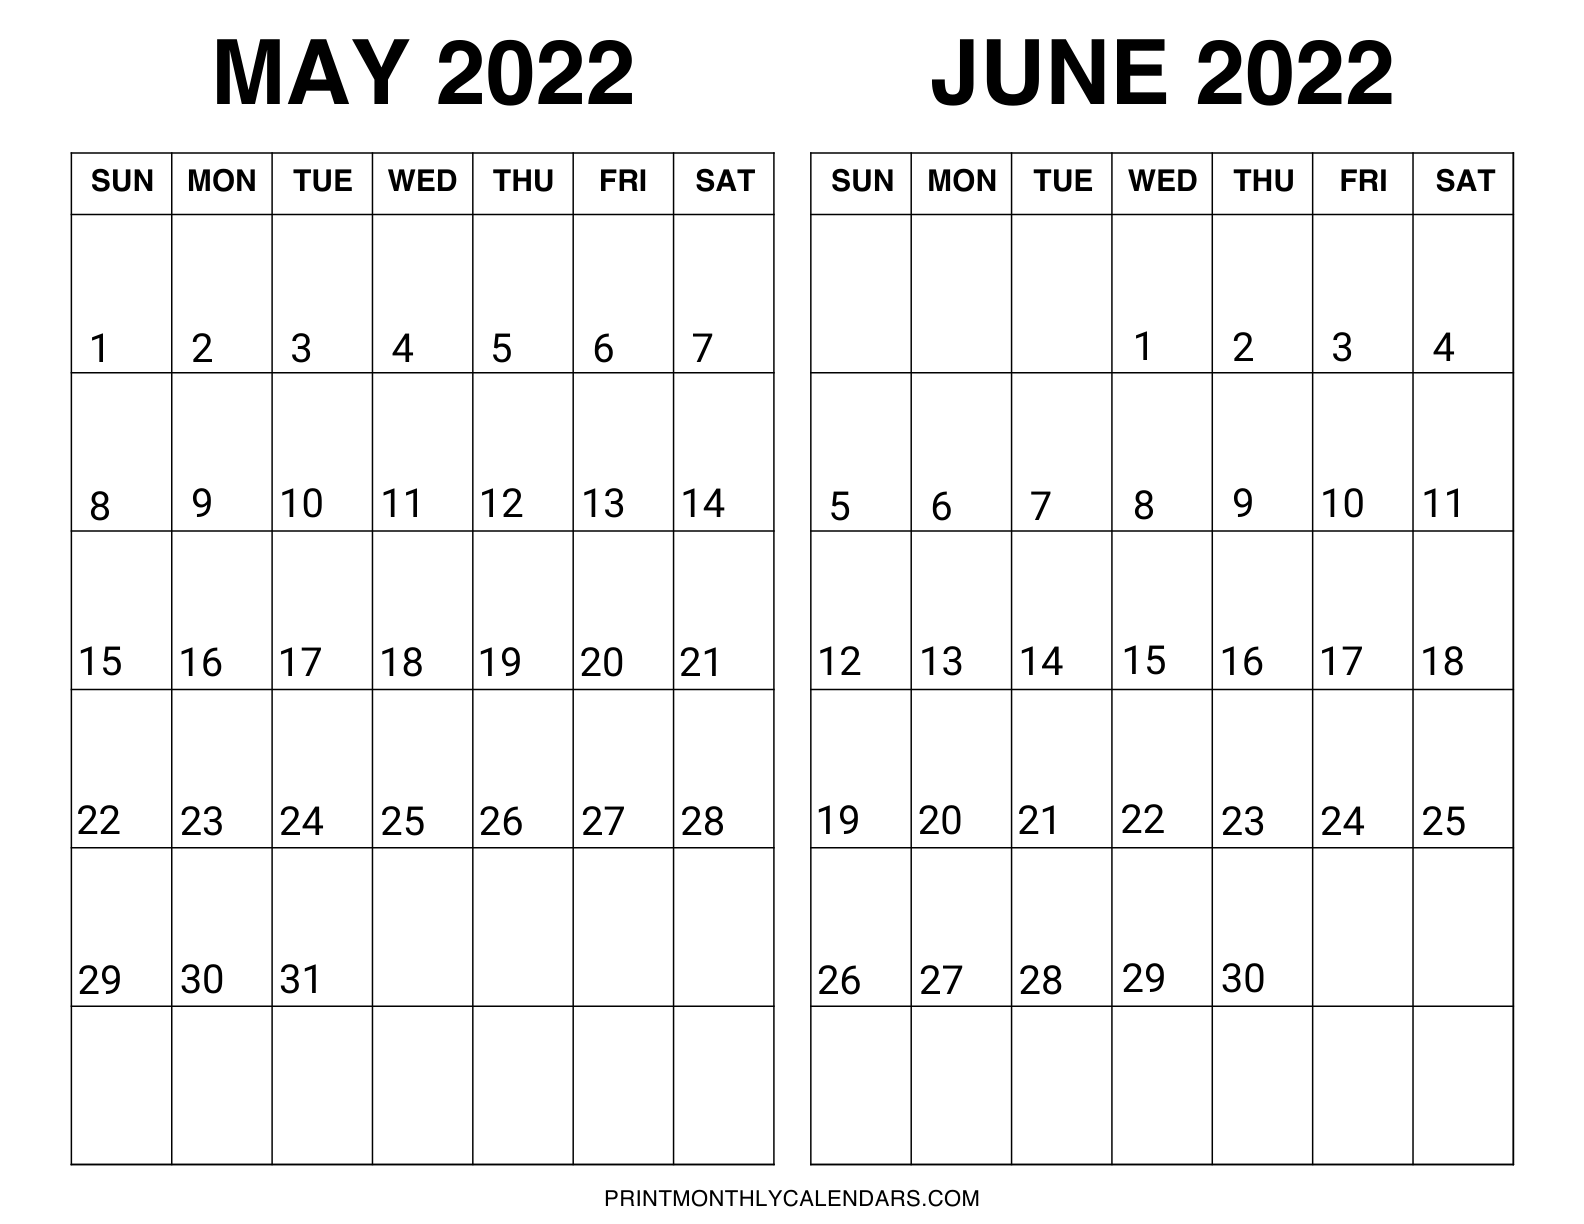 Calendar template for the months of May and June 2022, with weekdays starting from Sunday. On one page, the 2-month template has a landscape layout with bold month headings.